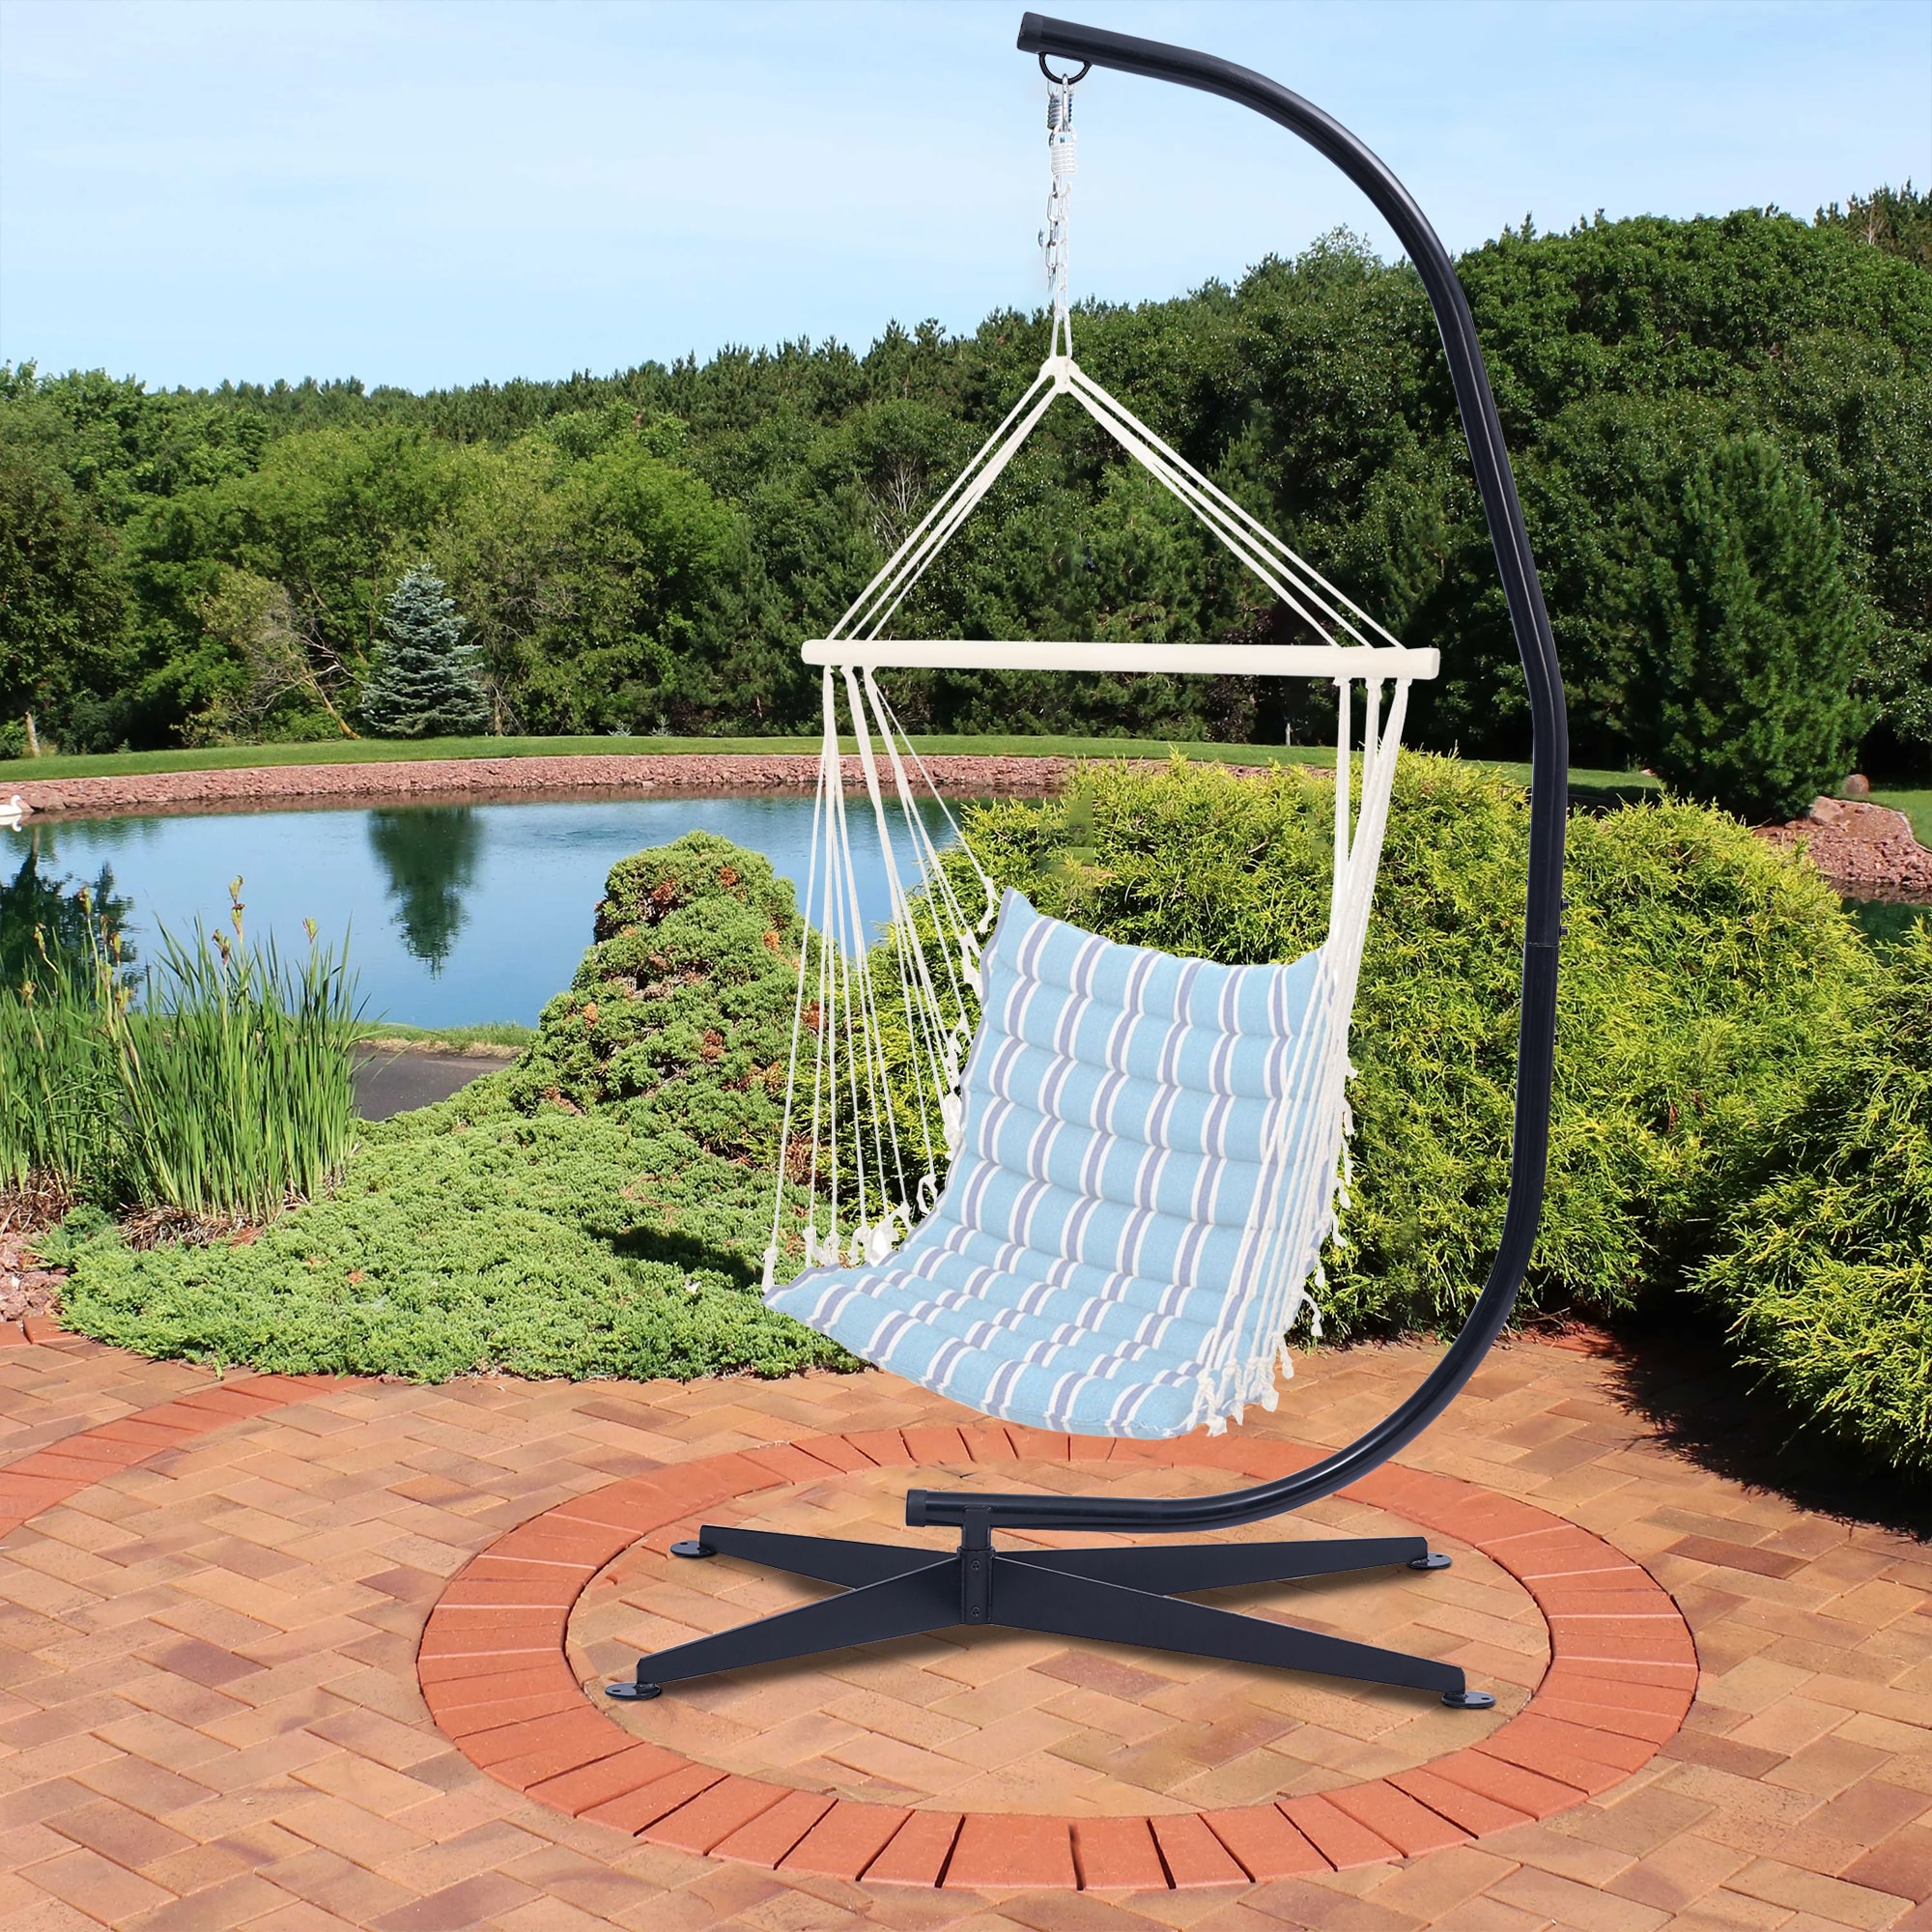 inch HCY Hammock Chair Stand Only C Stand Hanging Stand Heavy Duty 360 Degree Rotation for Loungers,Yard,Garden 44'inch x 85inch H Patio,Bedroom Indoor Outdoor- Black L 